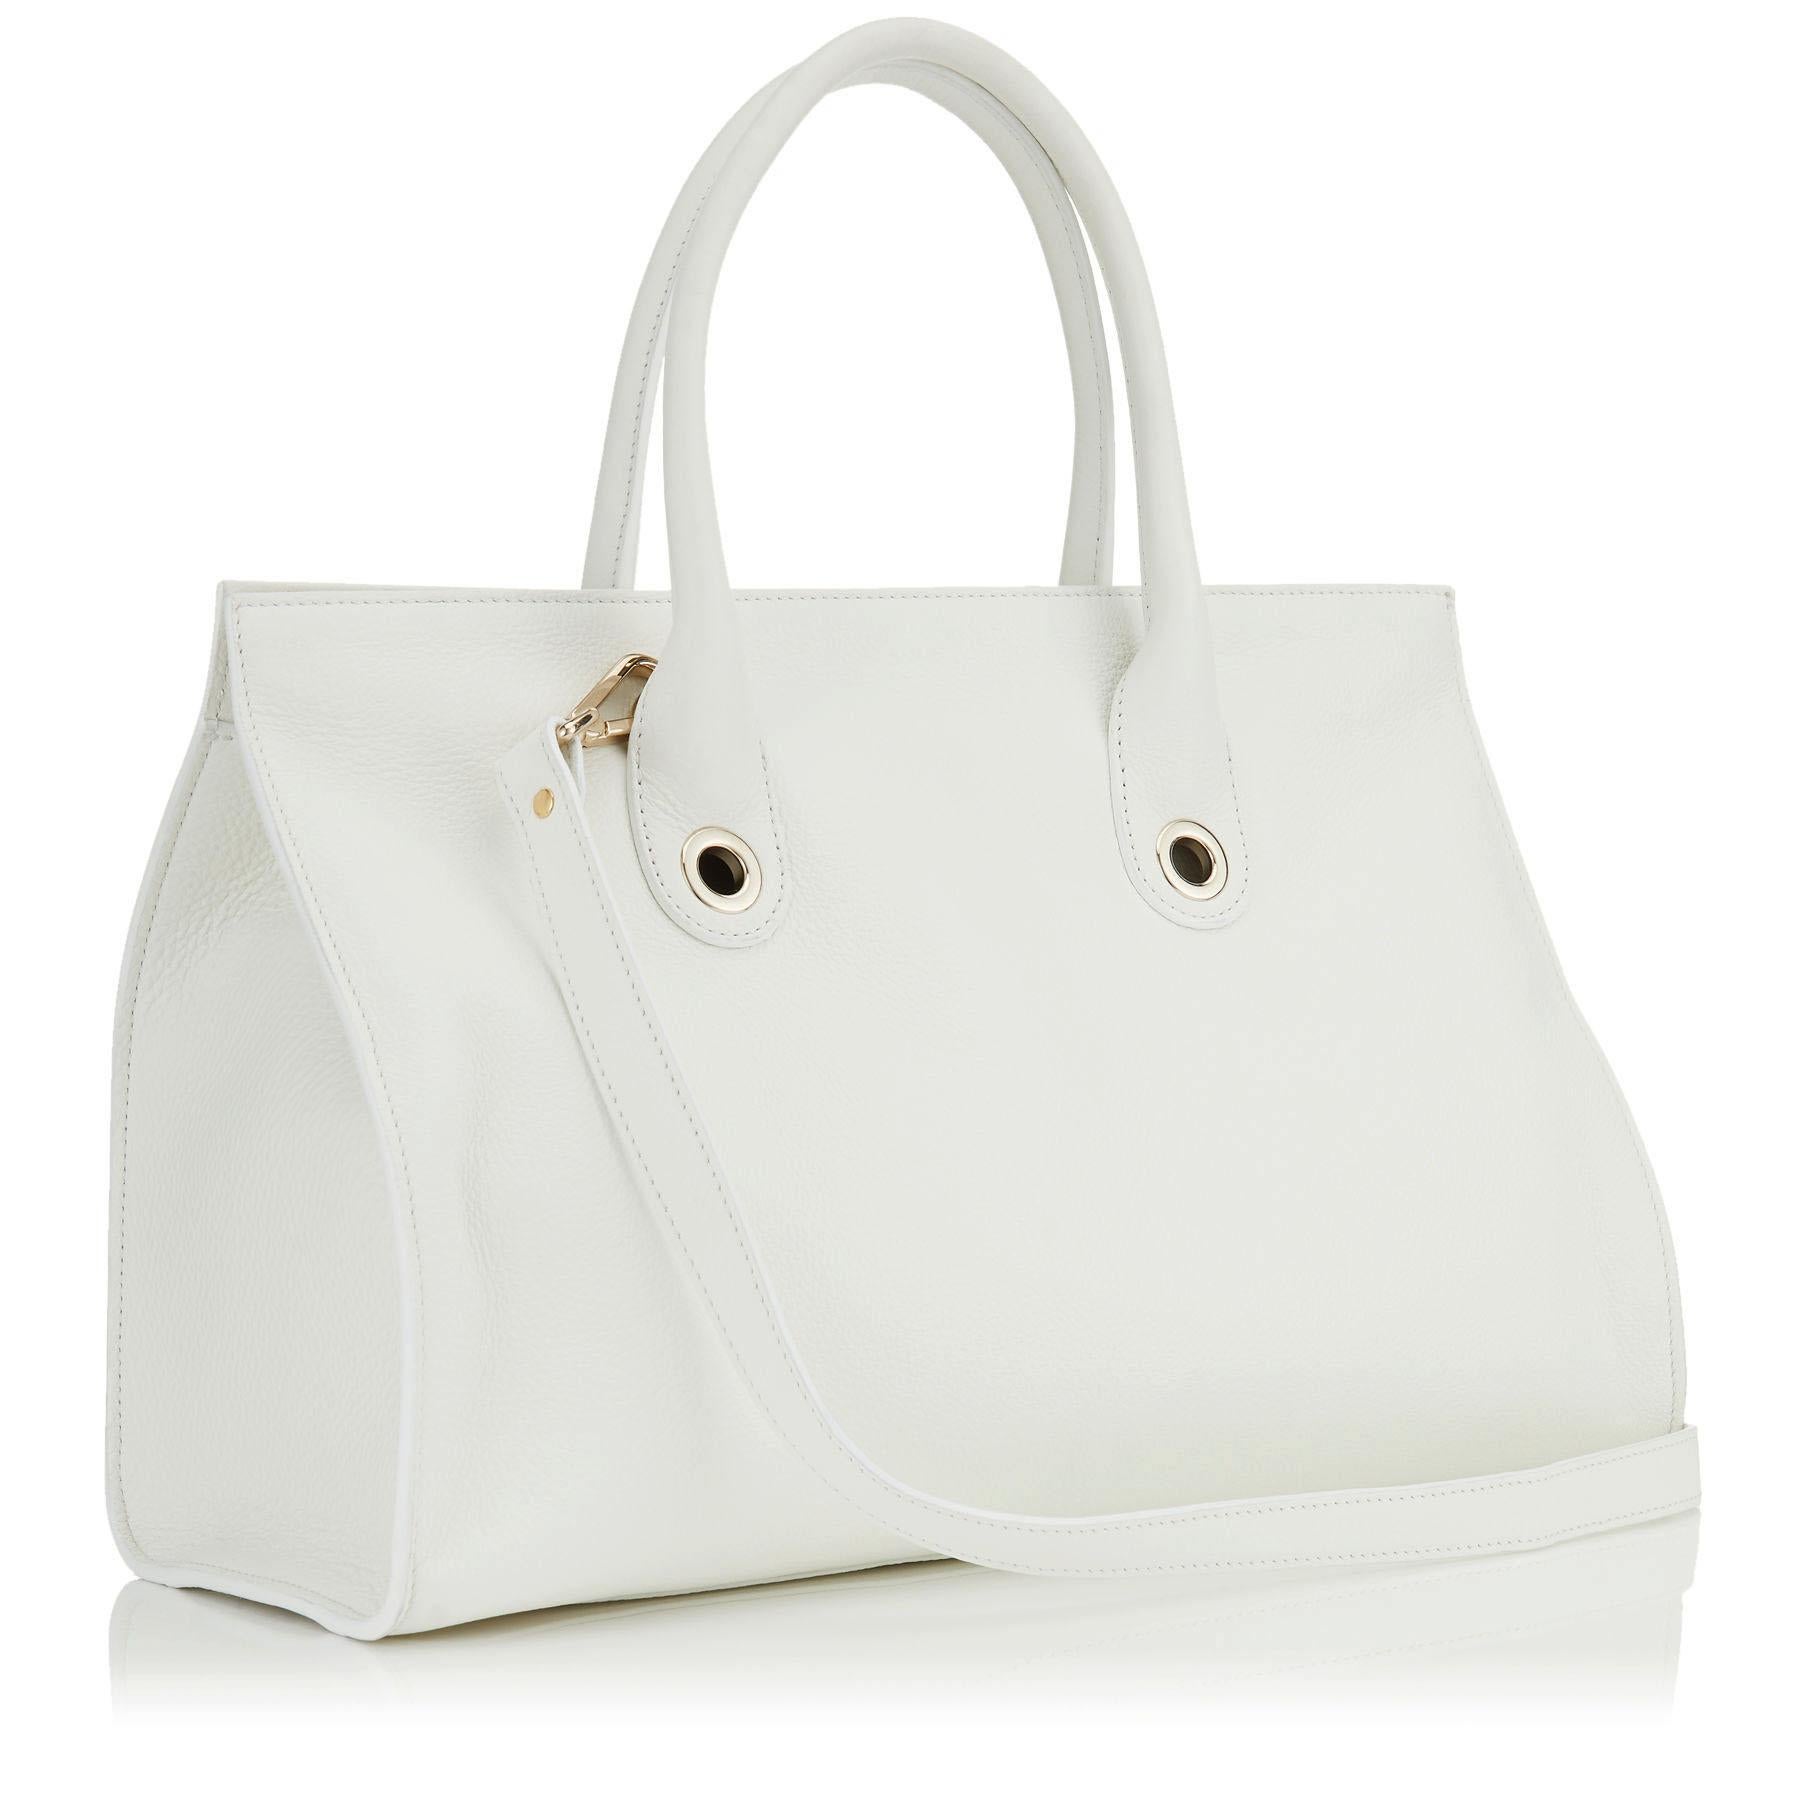 This popular Jimmy Choo Riley's Grainy Calf Leather Cross-body Bag in White. The over sized tote bag is trimmed with gold-toned hardware. The opening features a flip-lock closure at front and 4 protective metal feet on bottom. The removable and